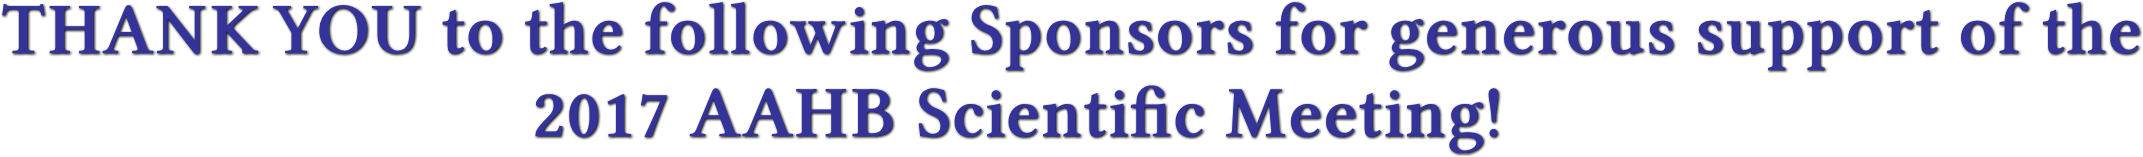 THANK YOU to the following Sponsors for generous support of the
                                               2017 AAHB Scientific Meeting!